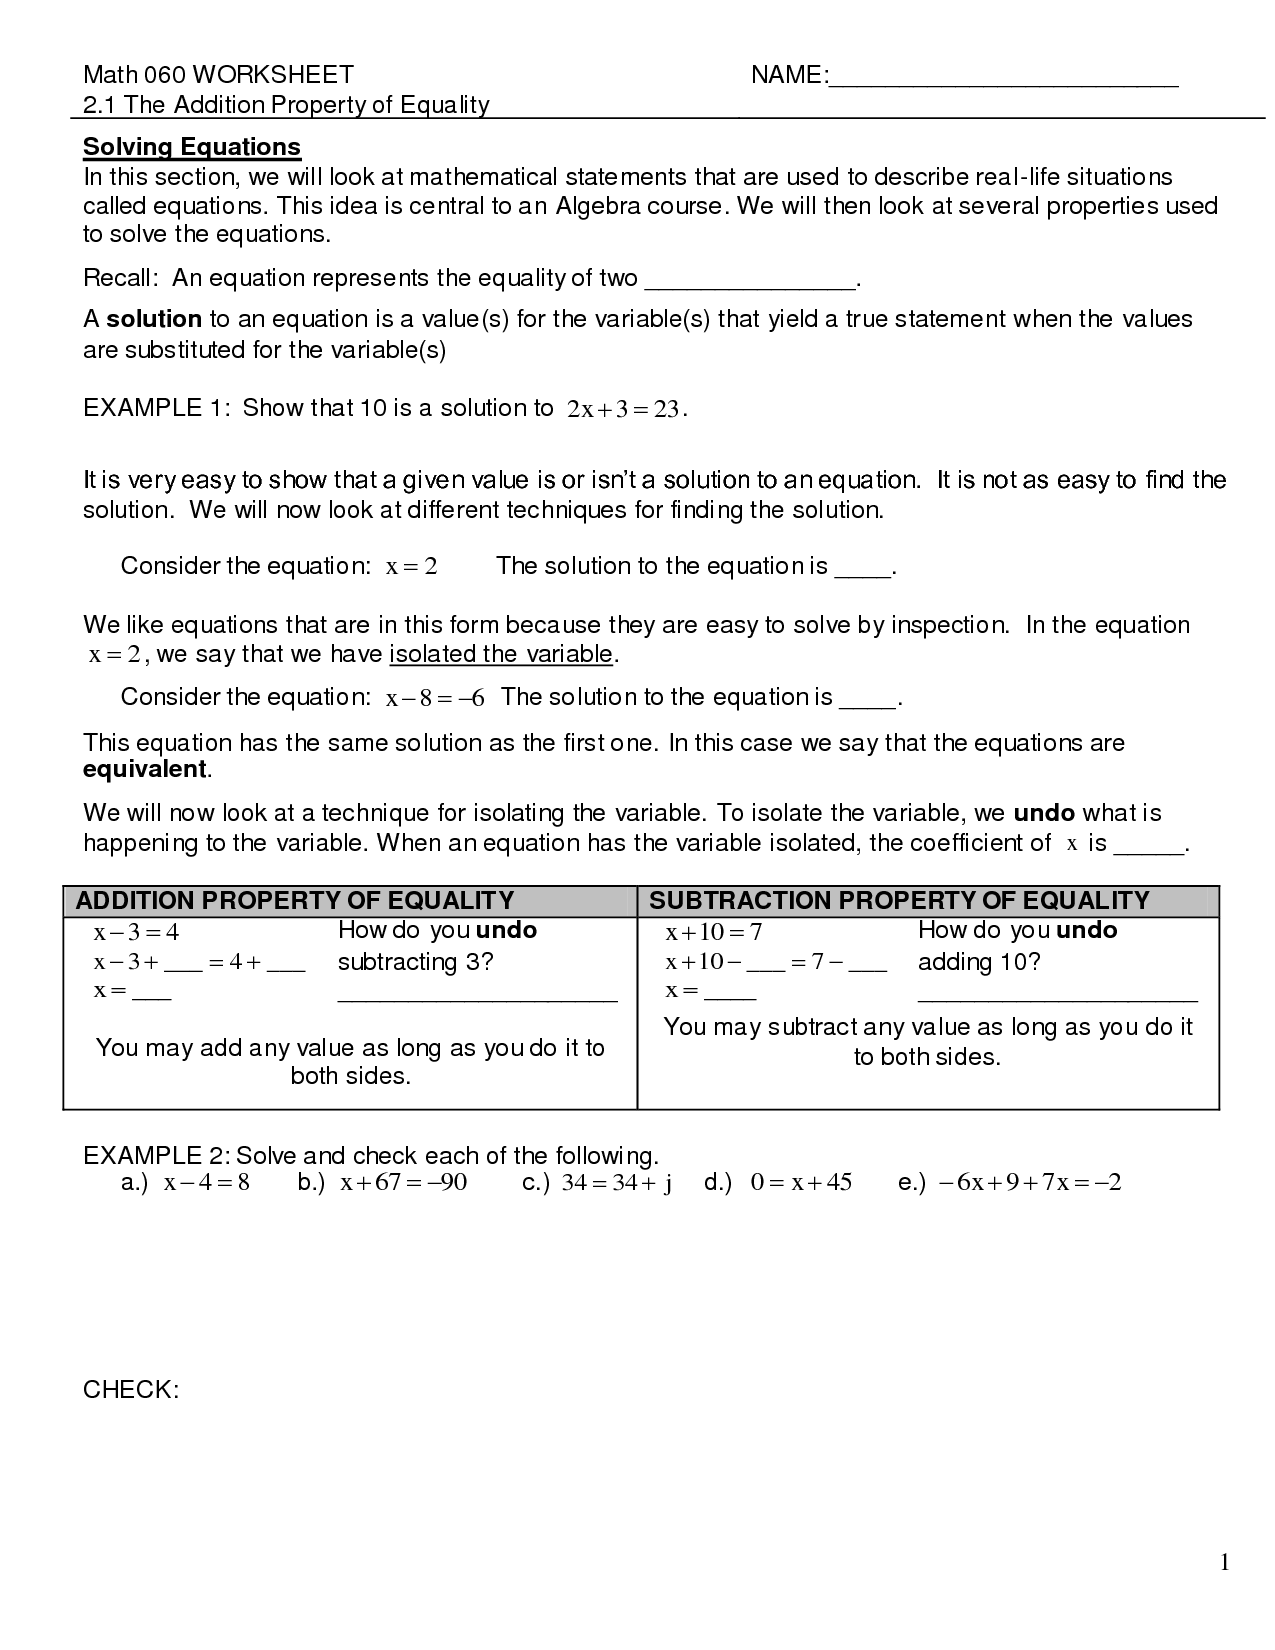 the-multiplying-2-digit-by-2-digit-numbers-with-various-decimal-places-a-math-worksheet-from